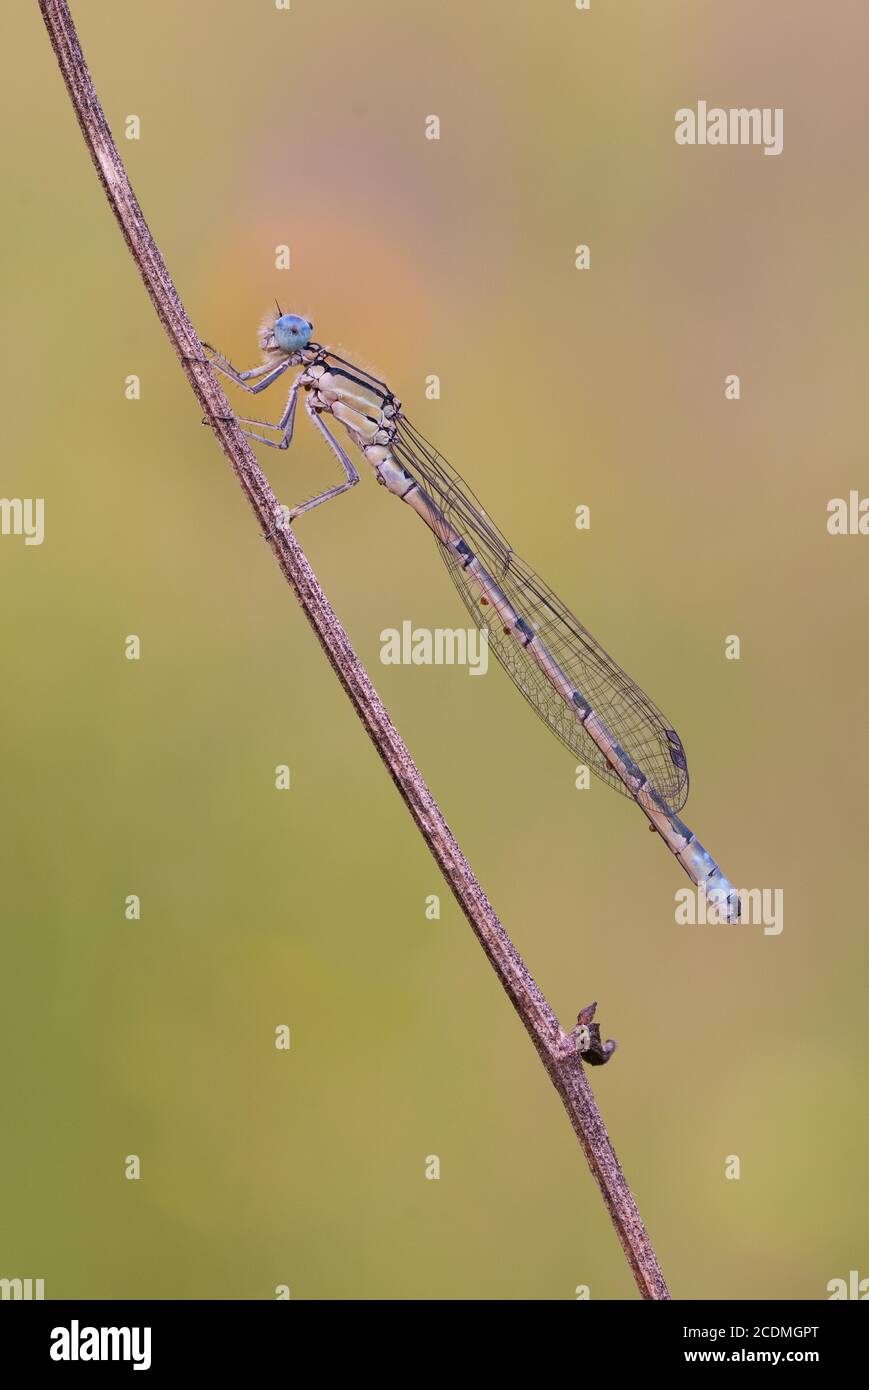 Damselfly (Zygoptera) à Sleeping place, Bavière, Allemagne Banque D'Images